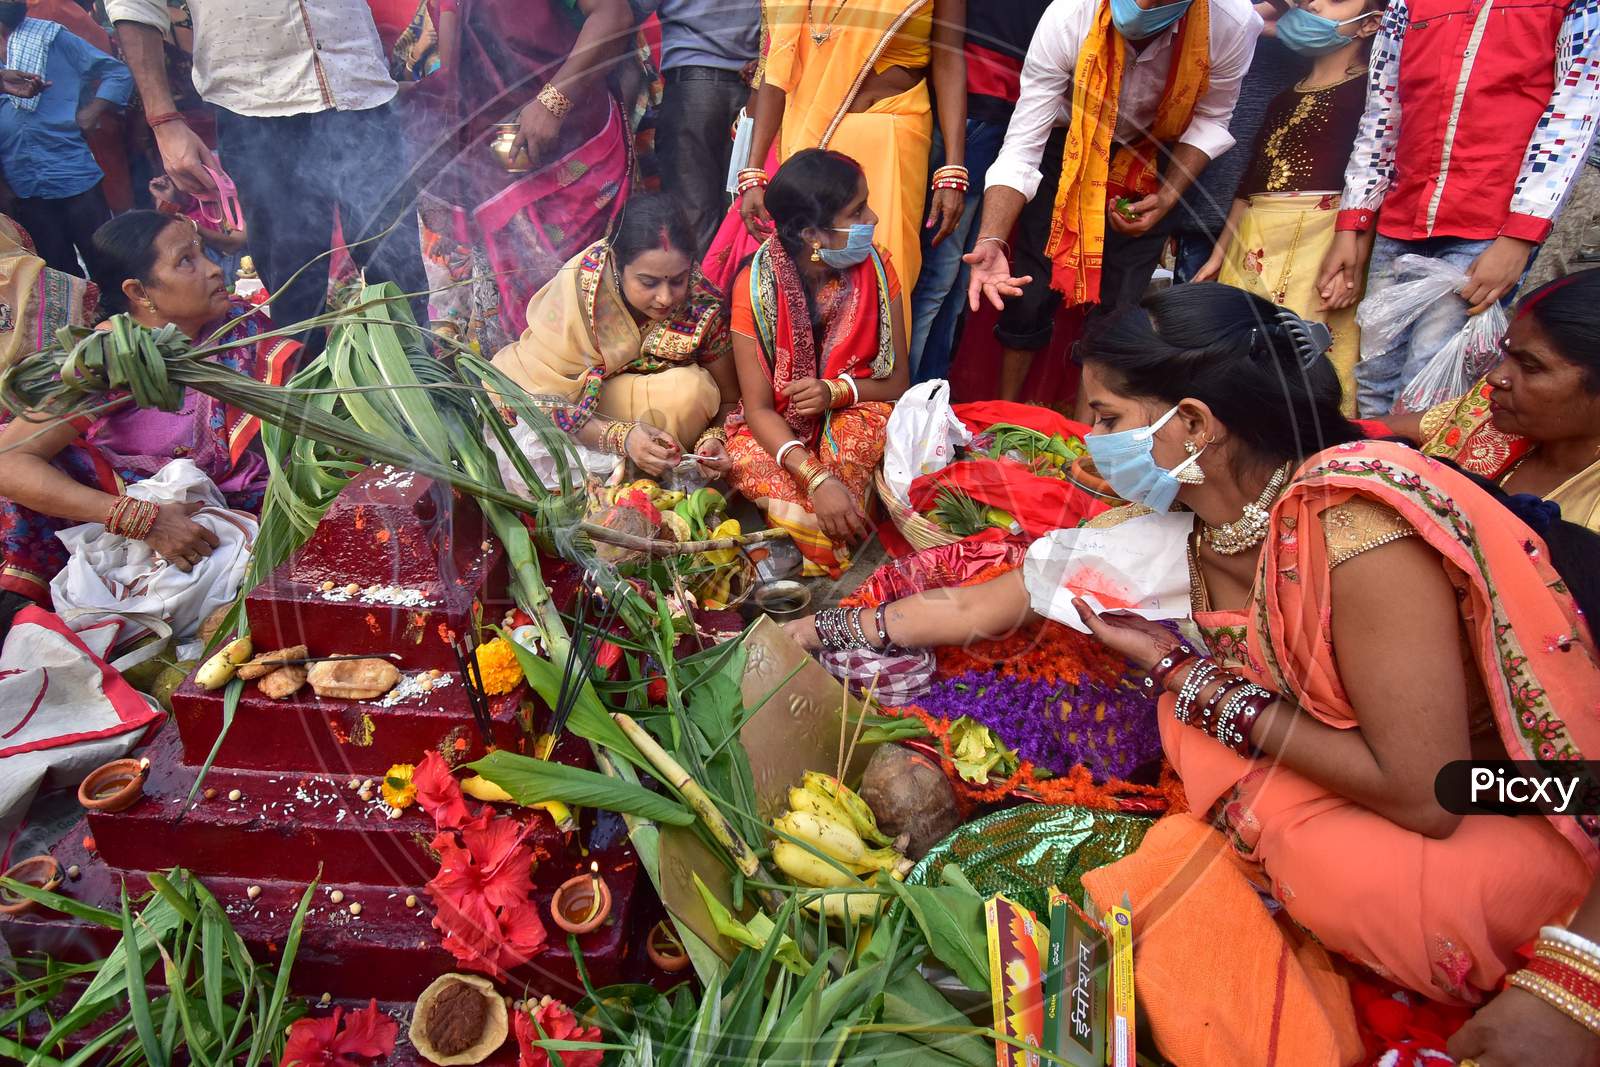 Hindu devotees offer prayers to the Sun on the occasion of Chhath Puja festival in Nagaon district, in the northeastern state of Assam on Nov 20,2020